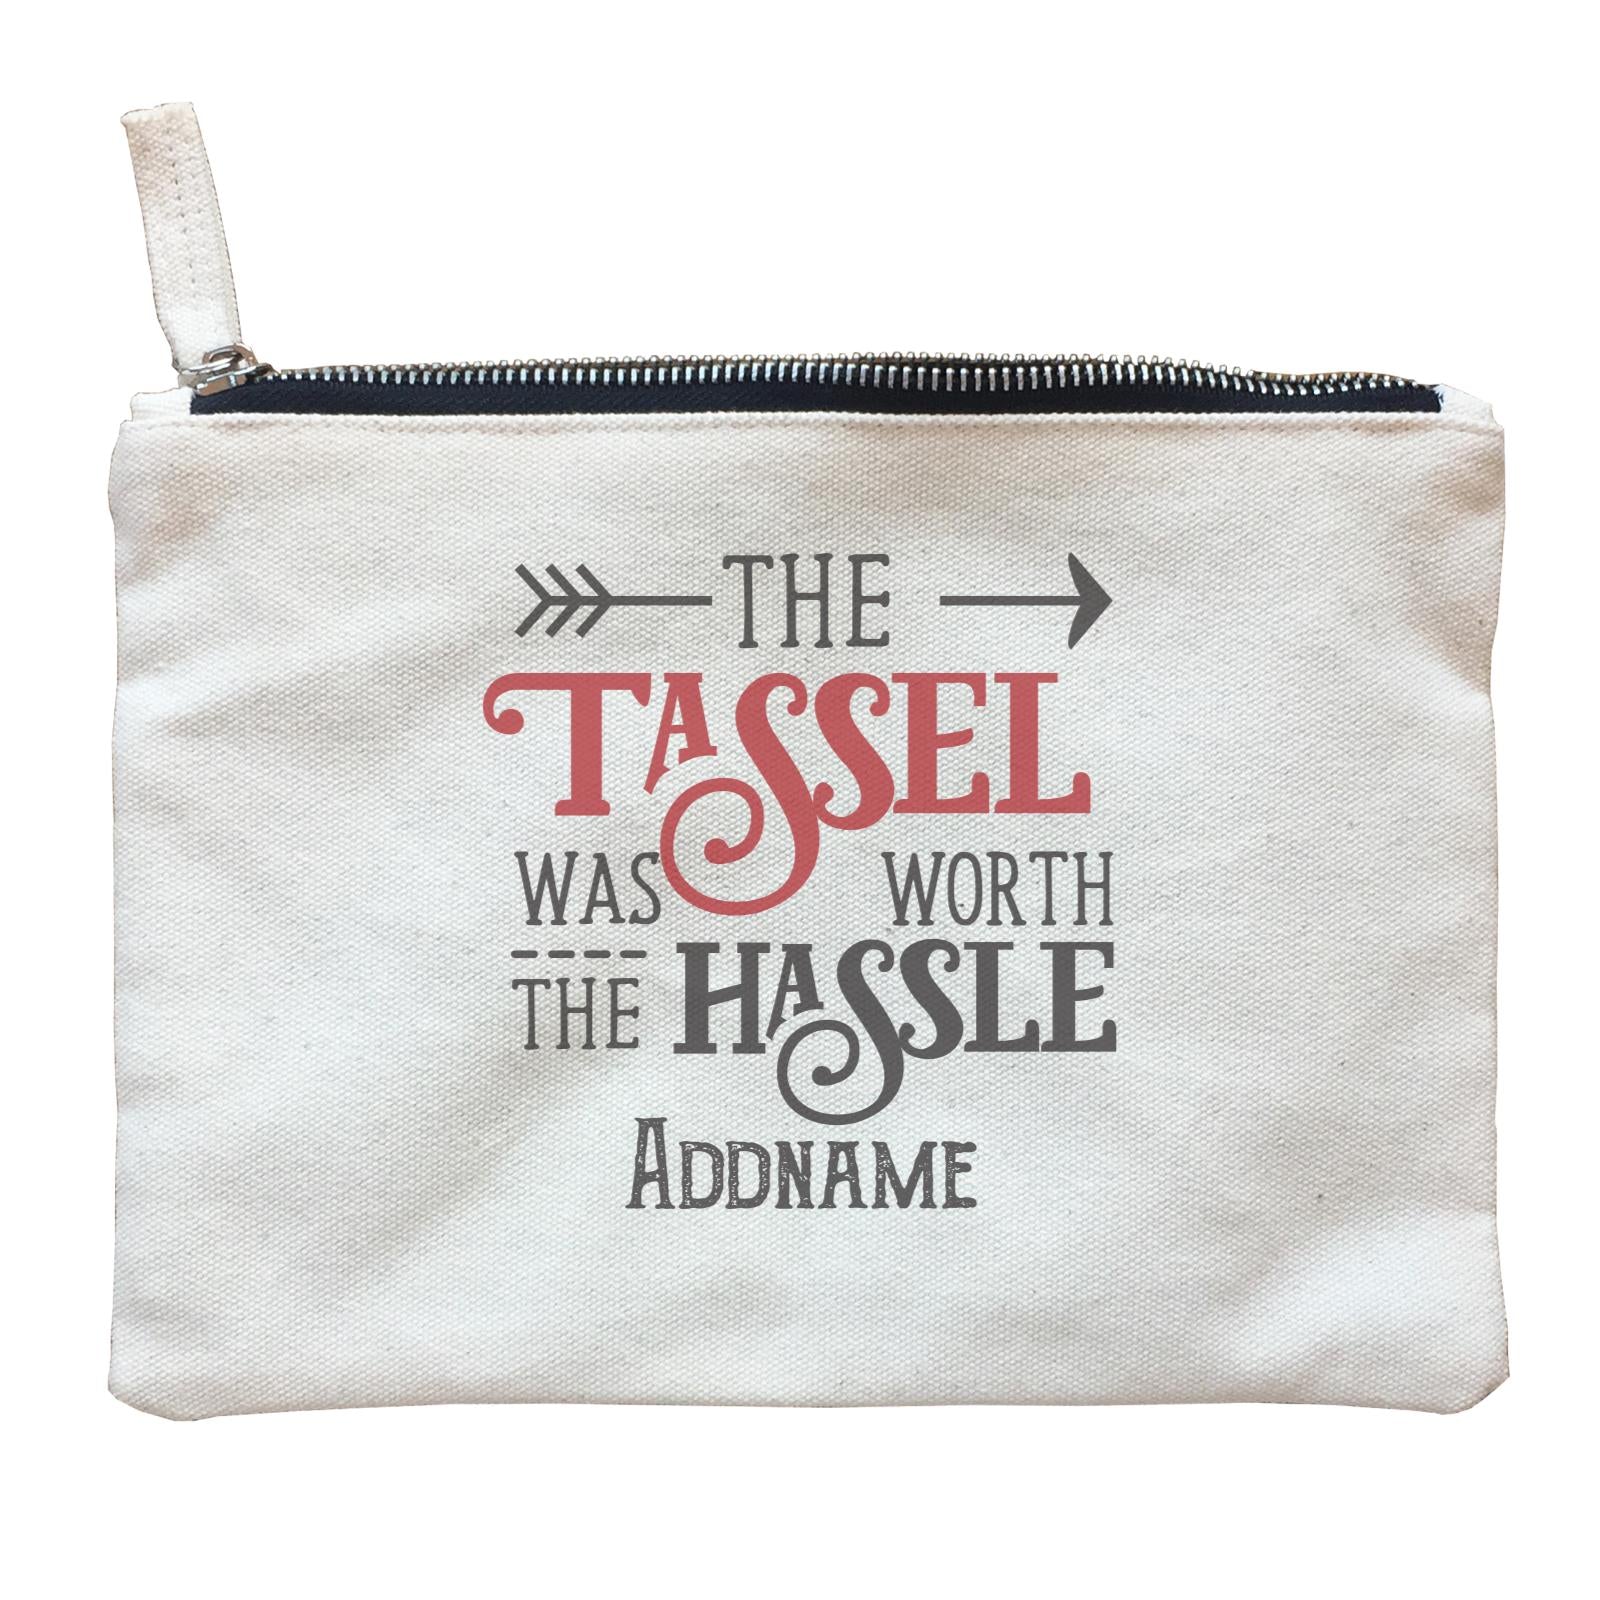 Graduation Series The Tassle Was Worth The Hassle Zipper Pouch